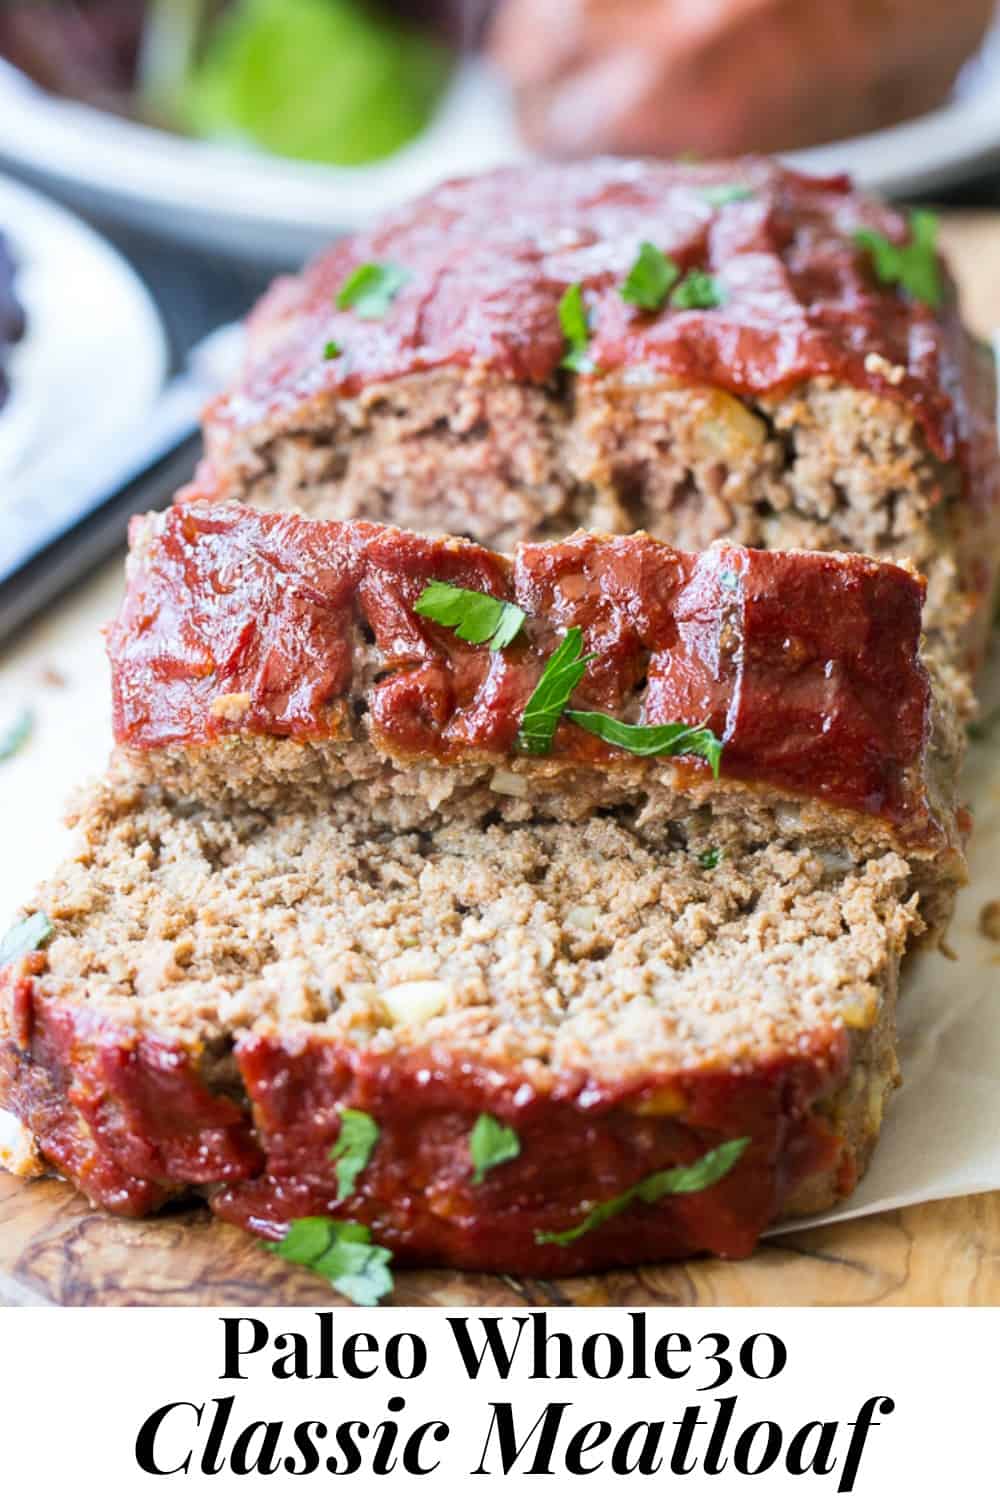 A 4 Pound Meatloaf At 200 How Long Can To Cook - Turkey ...